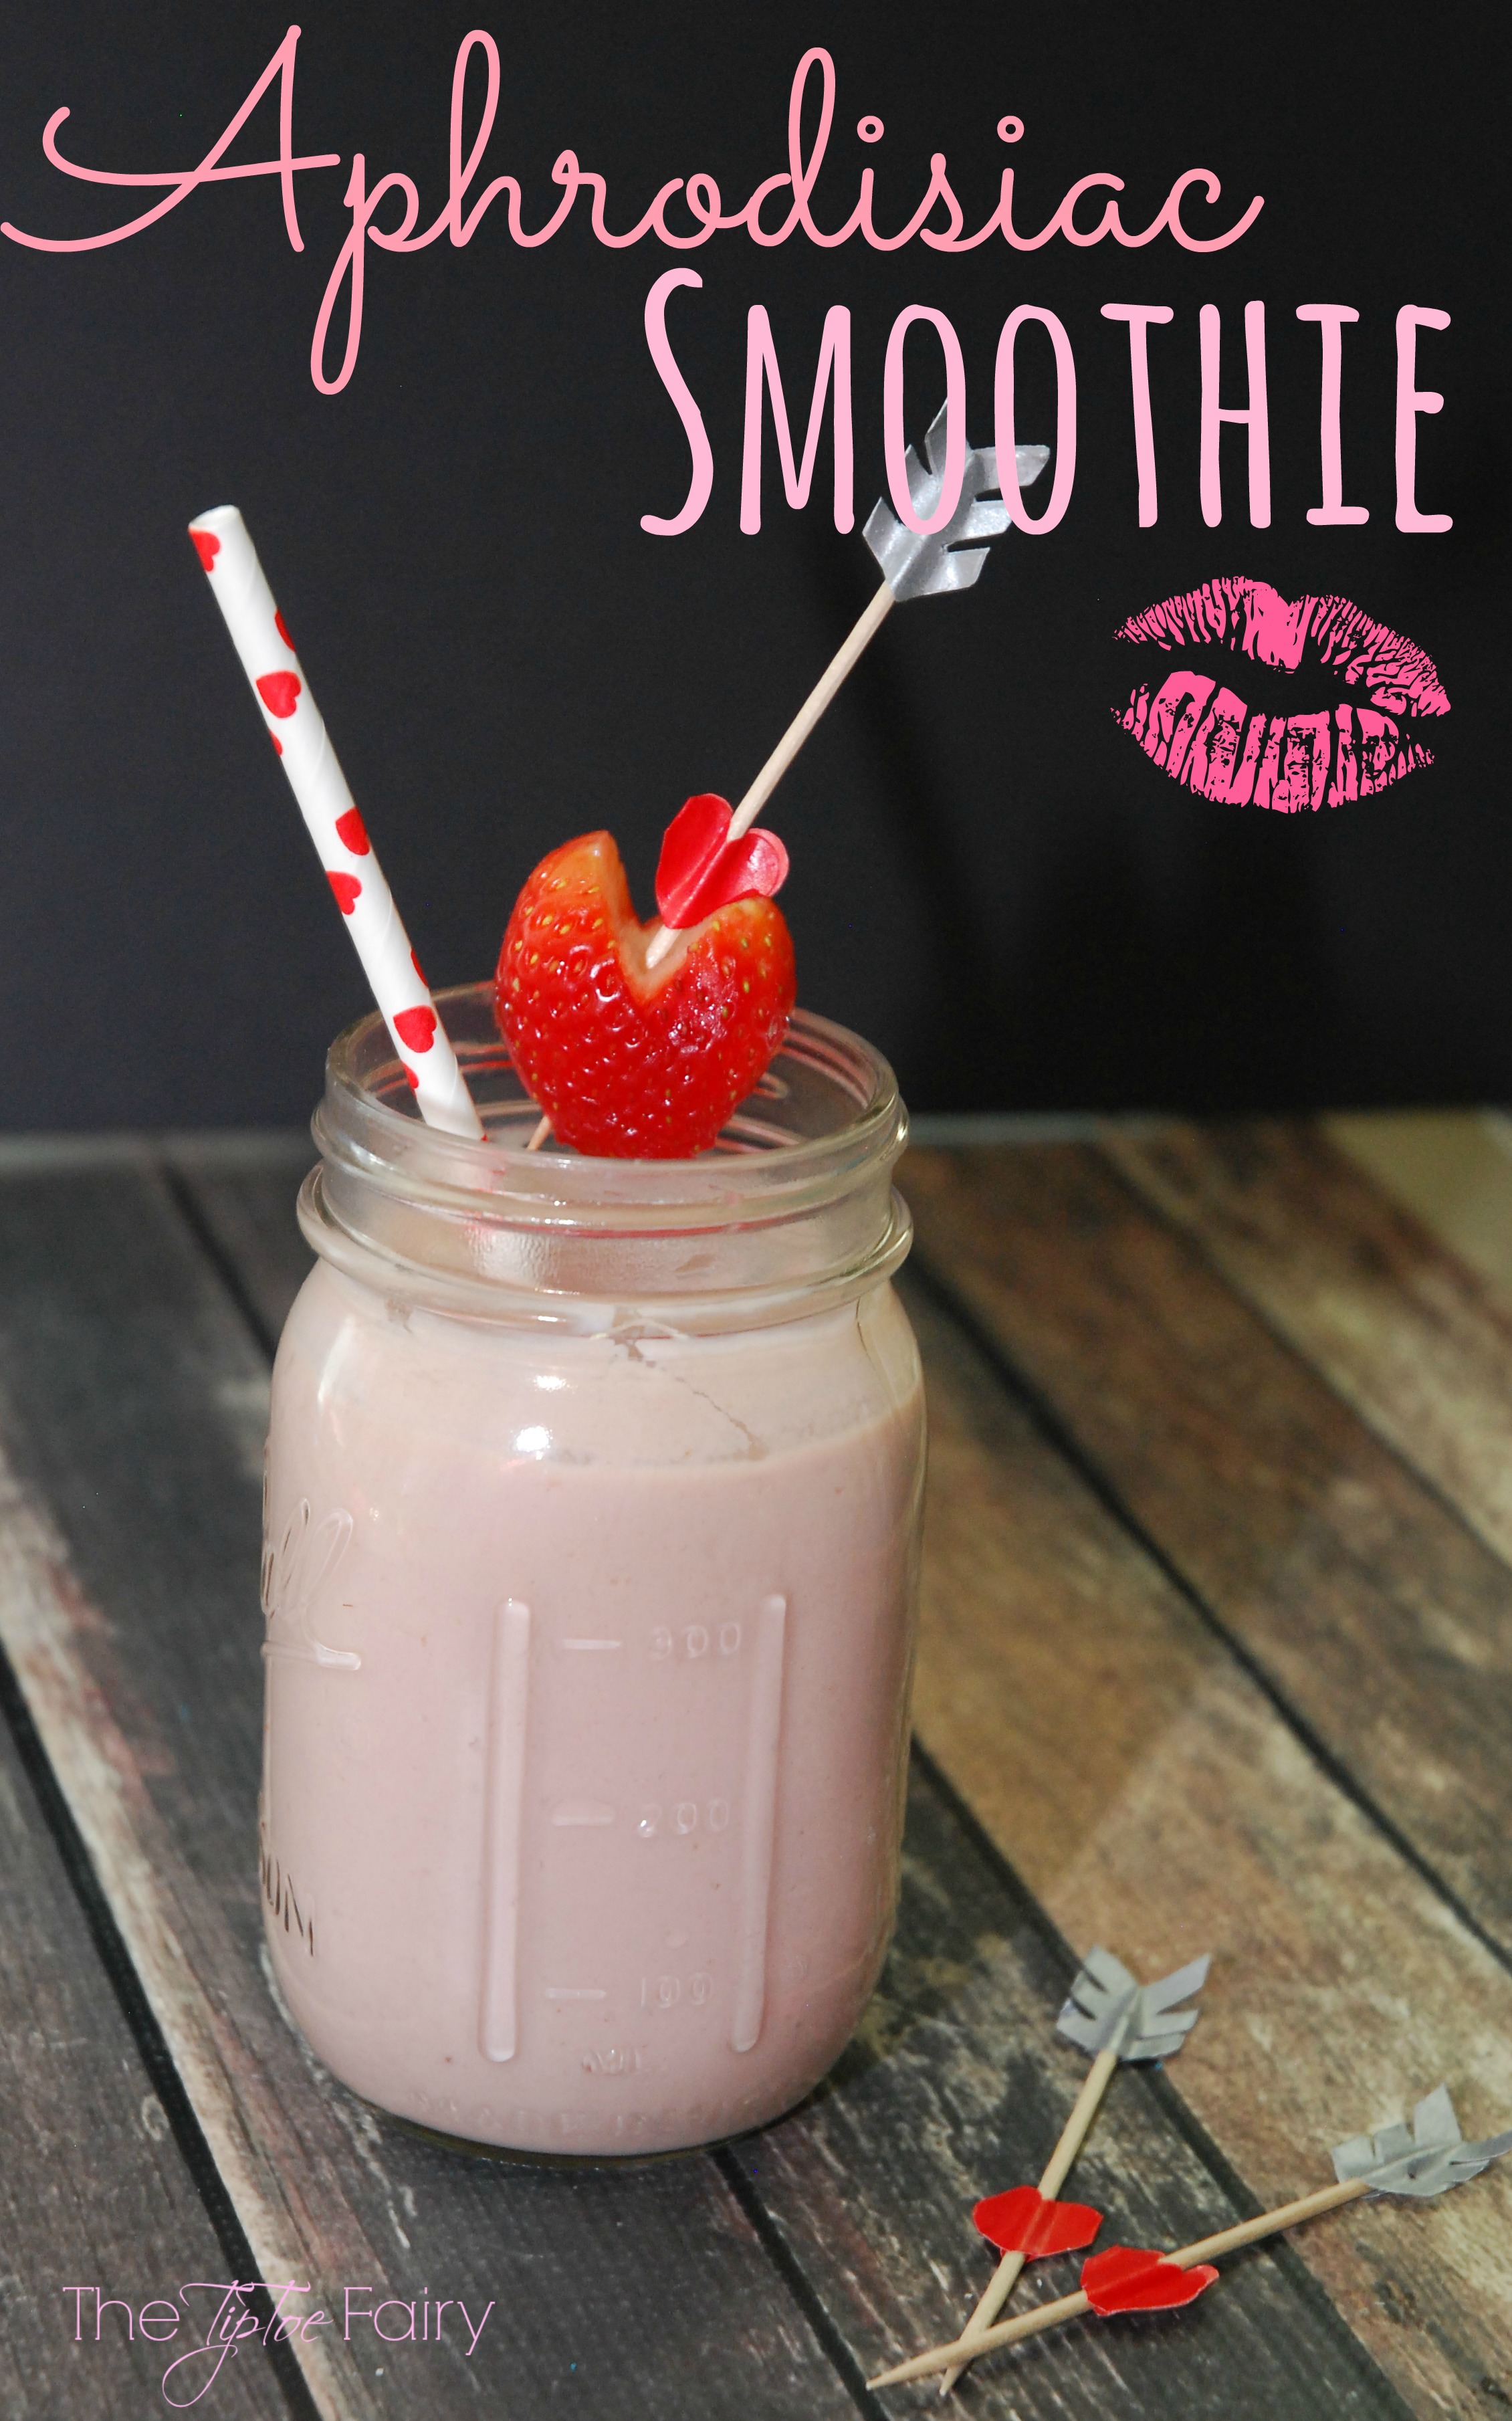 Originate an Aphrodisiac #Smoothie on your #Fancy for #ValentinesDay #meals #recipe #yum  Drink a LOVE Smoothie aphrodisiac smoothie label